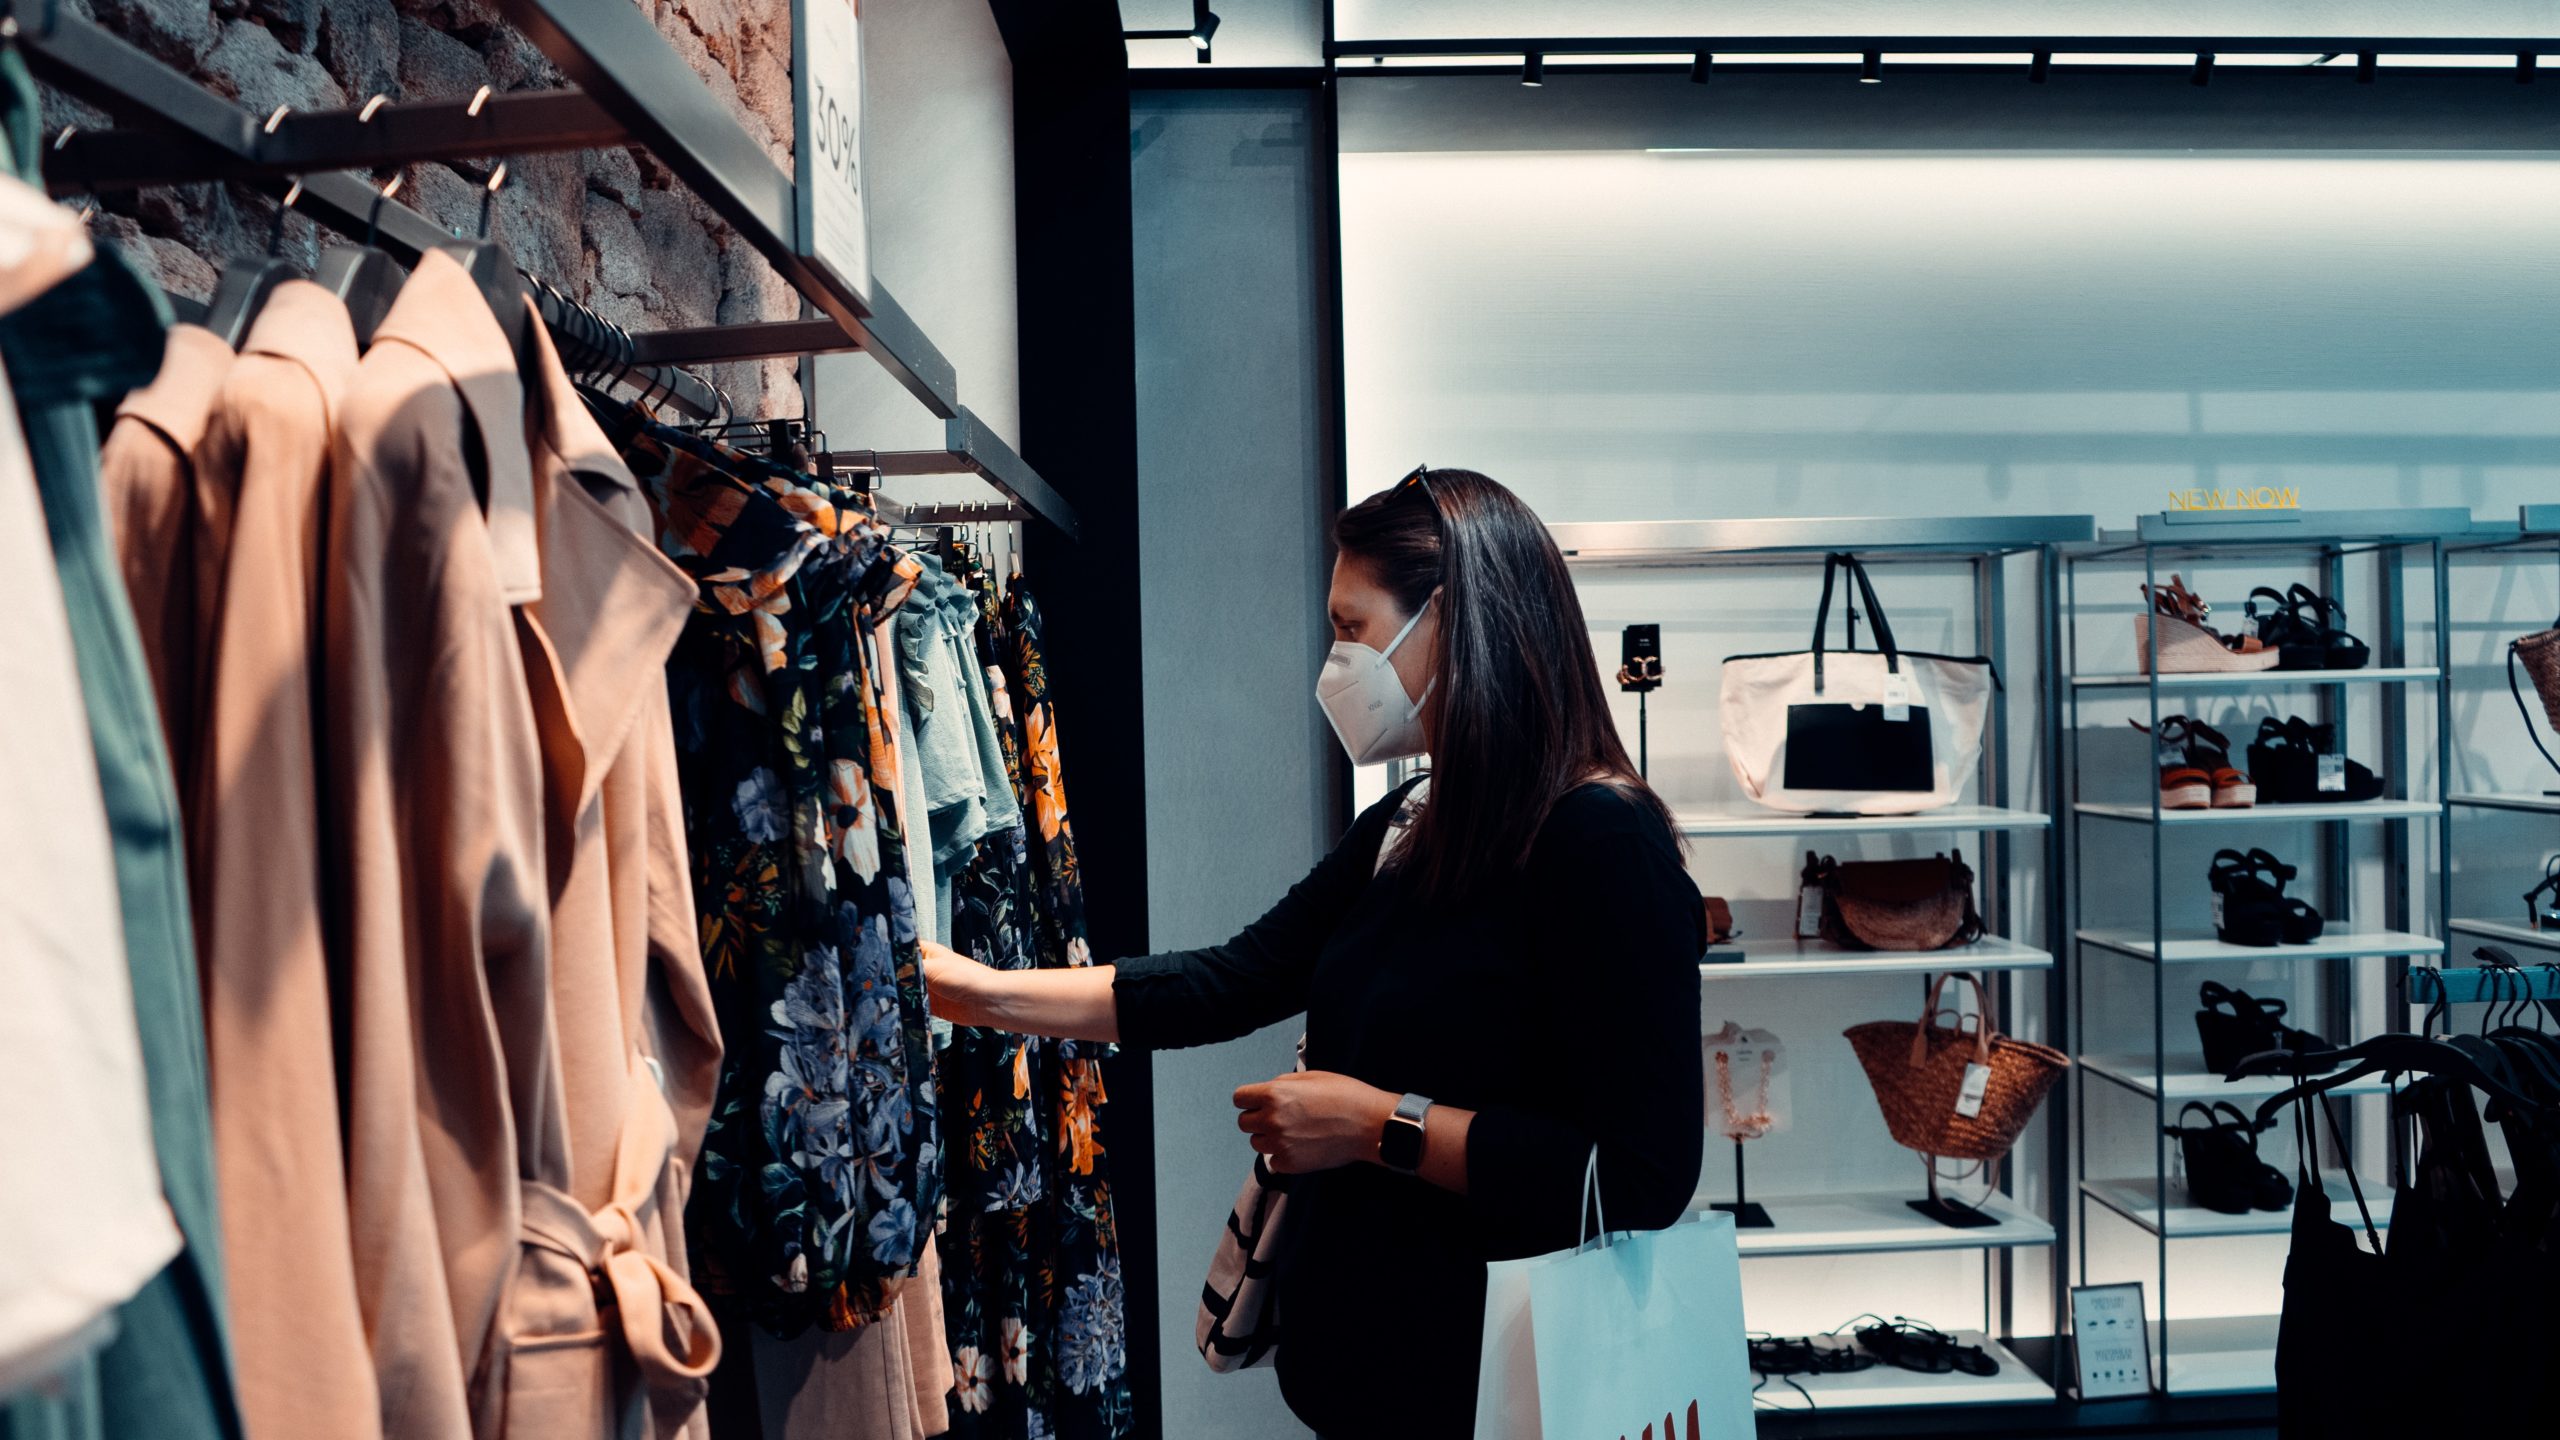 This image illustrates a woman shopping with a mask who is therefore concerned with Covid